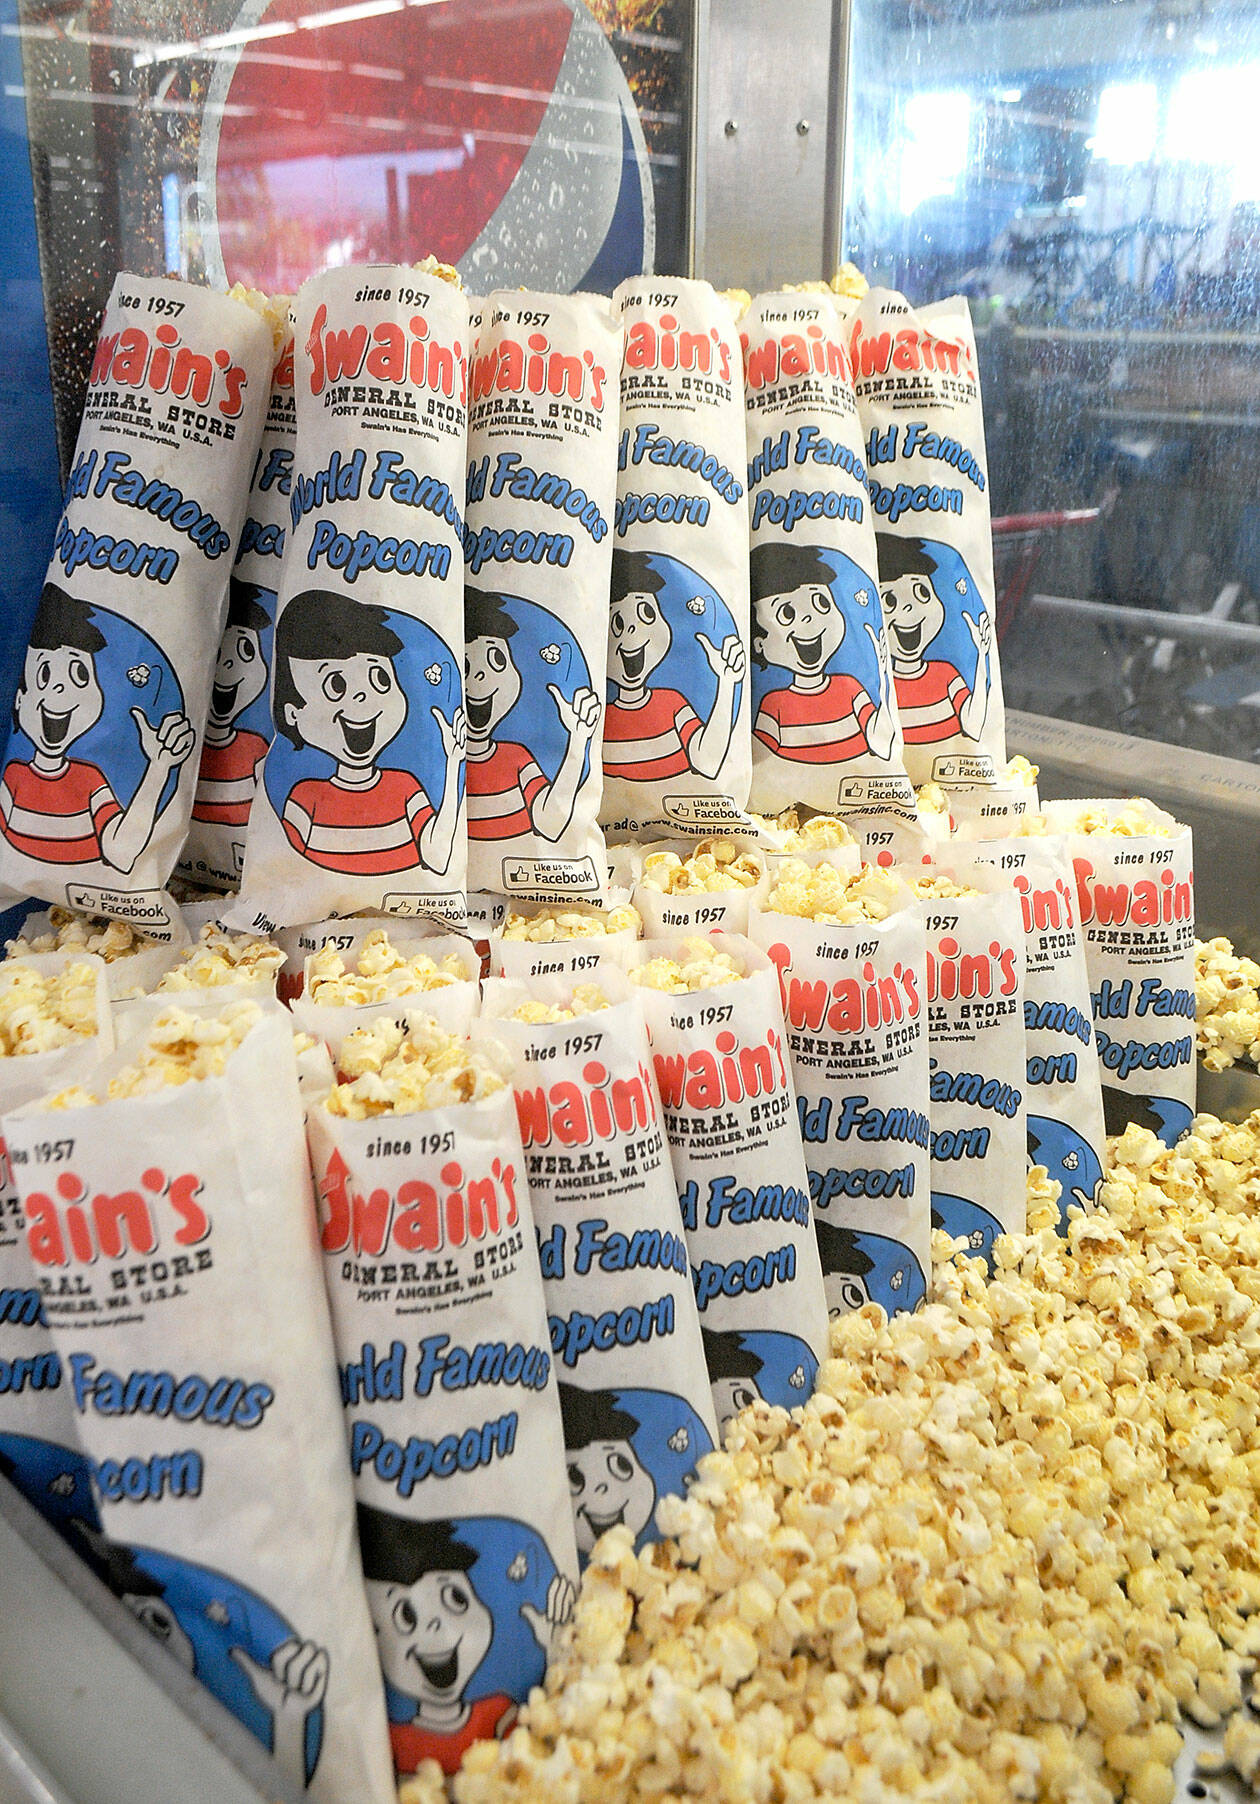 Bags of Swain’s popcorn wait as a salty snack for customers as popcorn sales resumed on Wednesday. (Keith Thorpe/Peninsula Daily News)